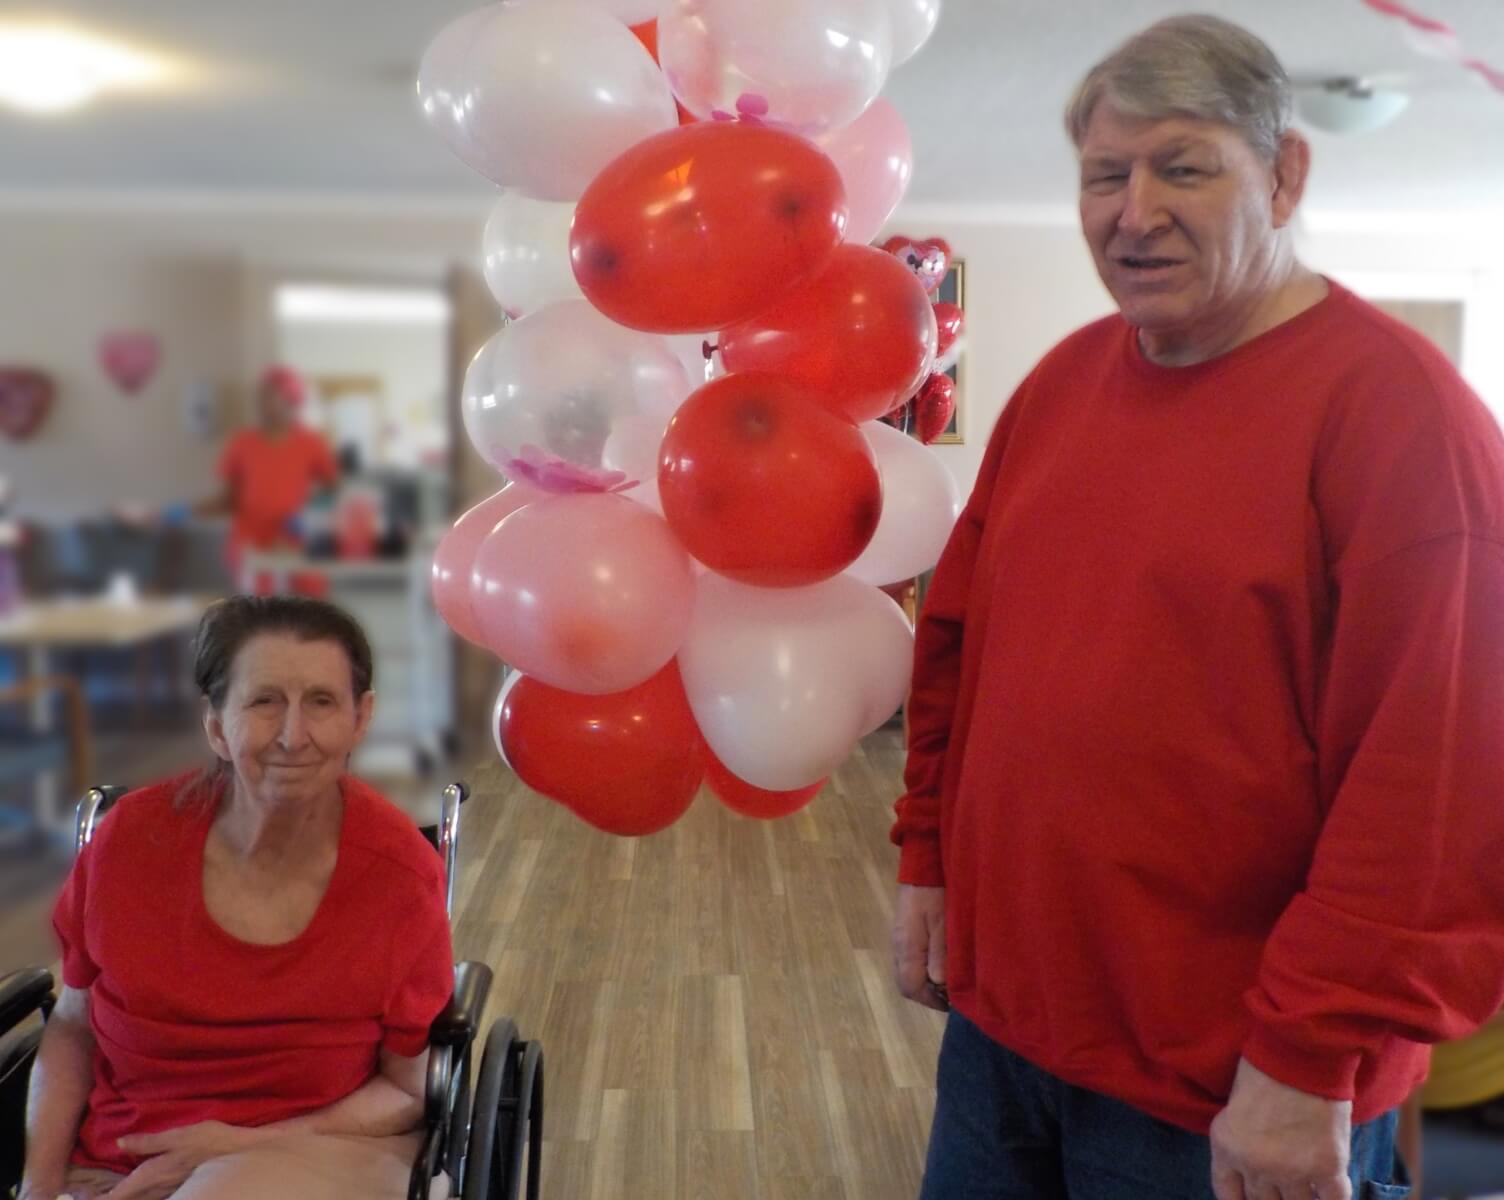 Residents Wanda Rowland and Gerald Miller posing with Valentine's Day Balloons